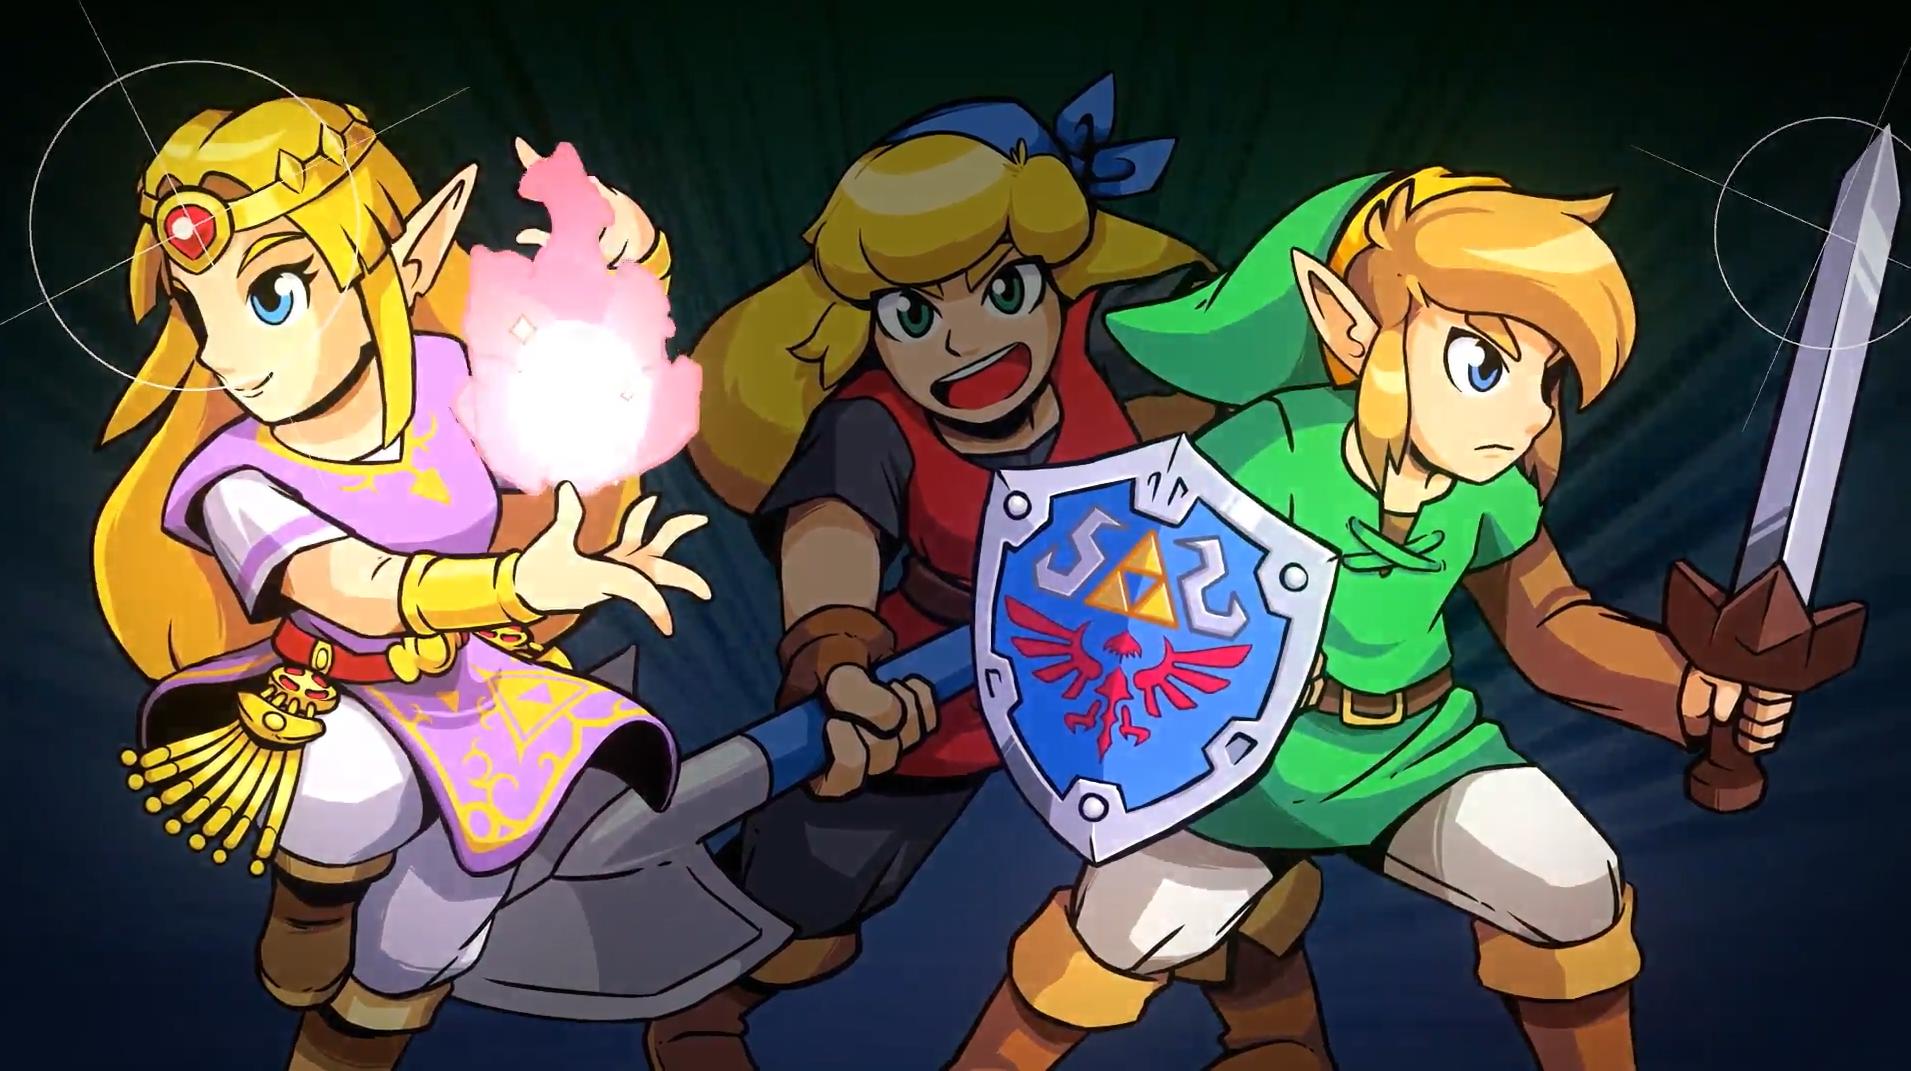 Cadence of hyrule characters